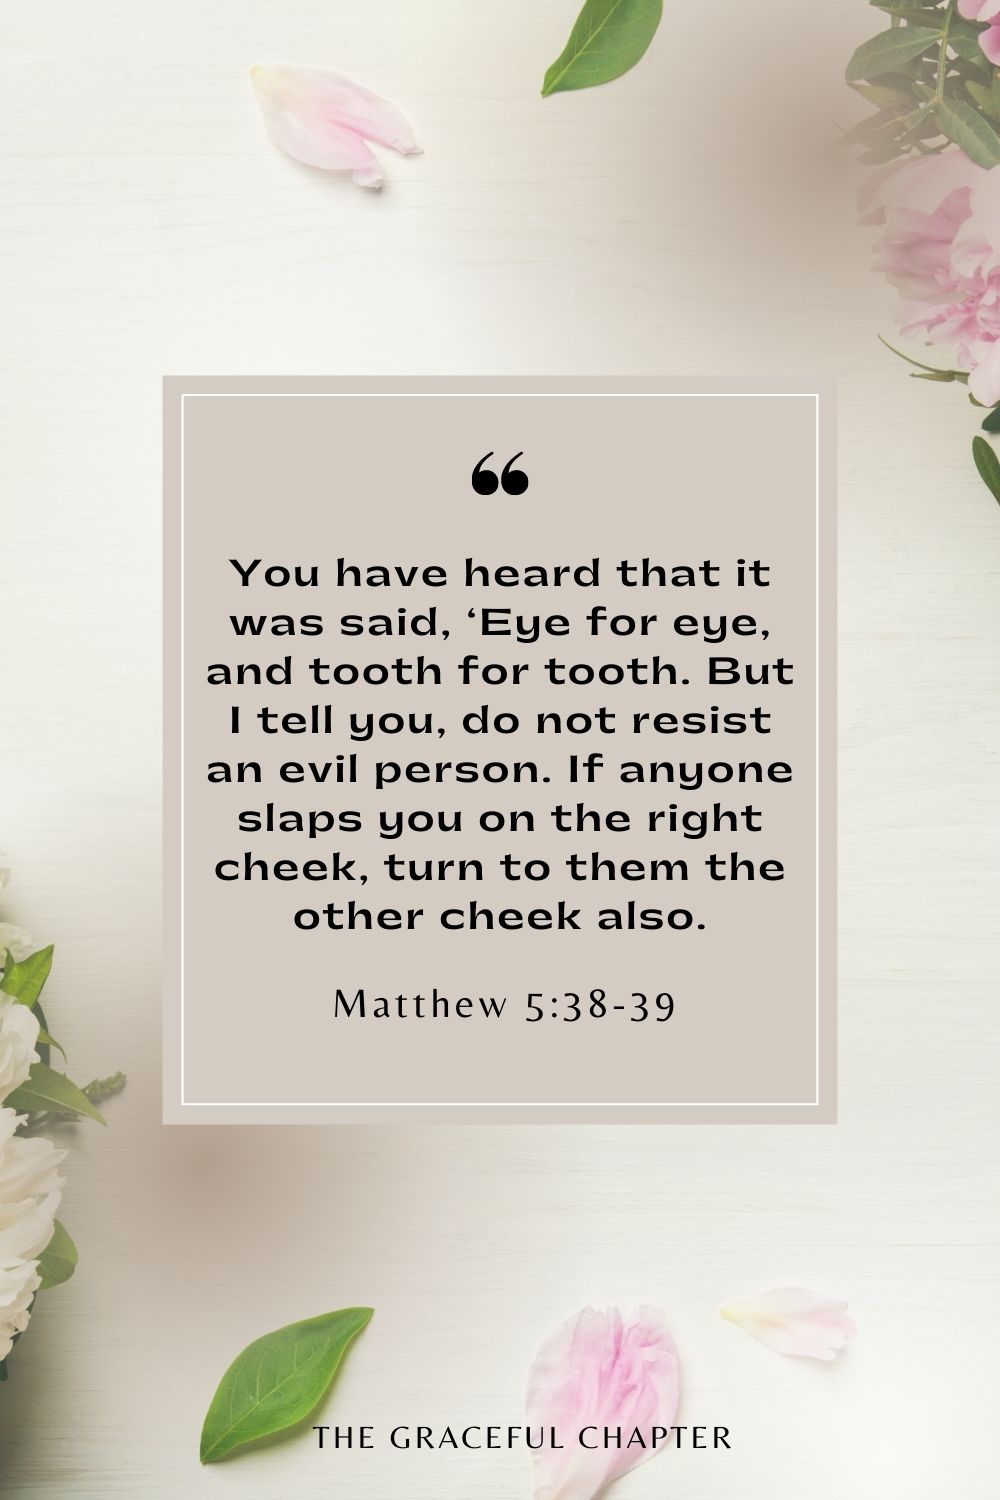 You have heard that it was said, ‘Eye for eye, and tooth for tooth. But I tell you, do not resist an evil person. If anyone slaps you on the right cheek, turn to them the other cheek also. Matthew 5:38-39